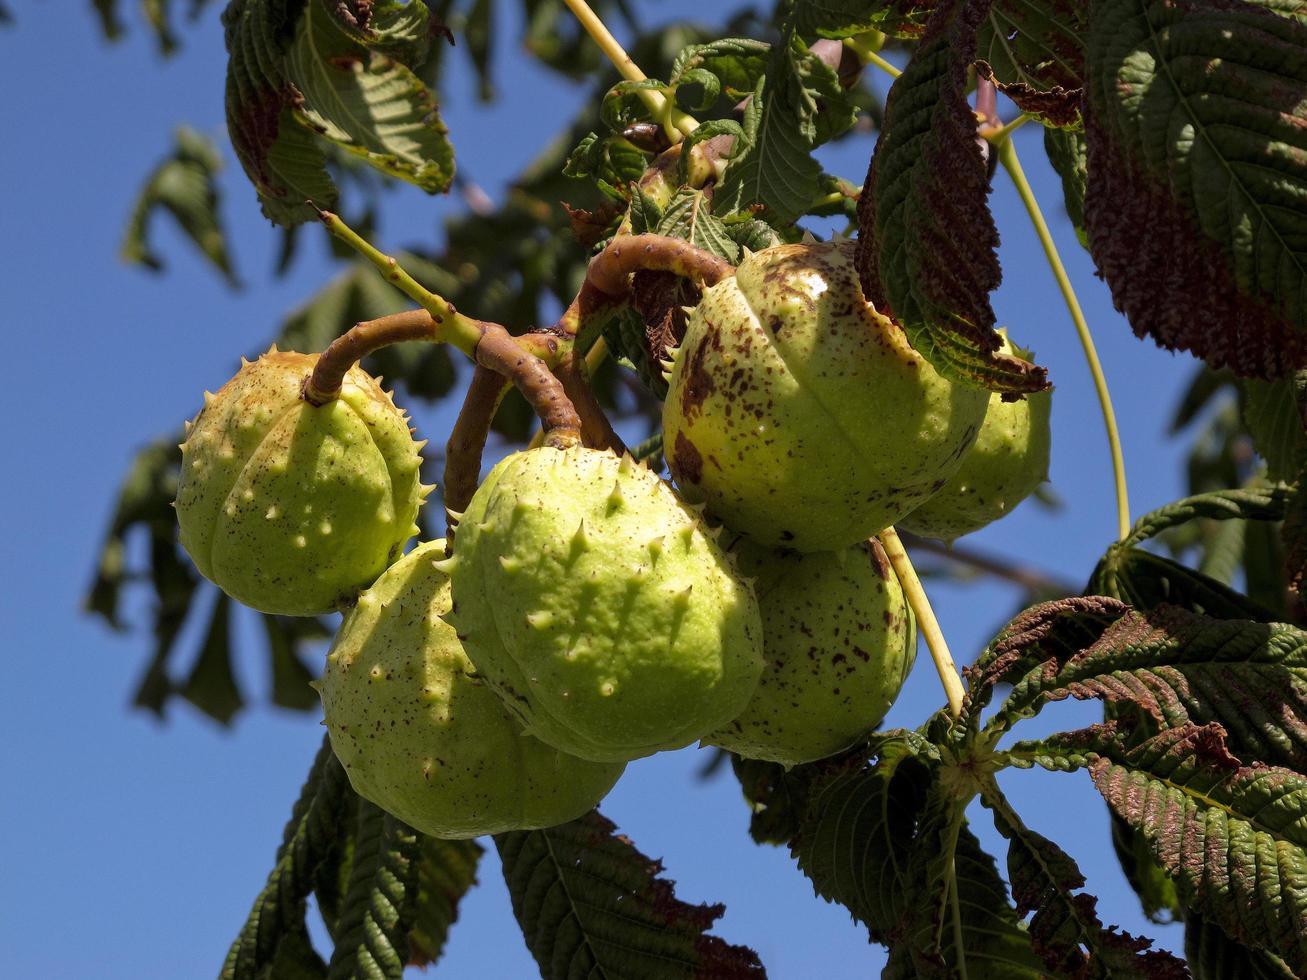 Chestnuts still in the tree with its green wrapping, in Spain photo